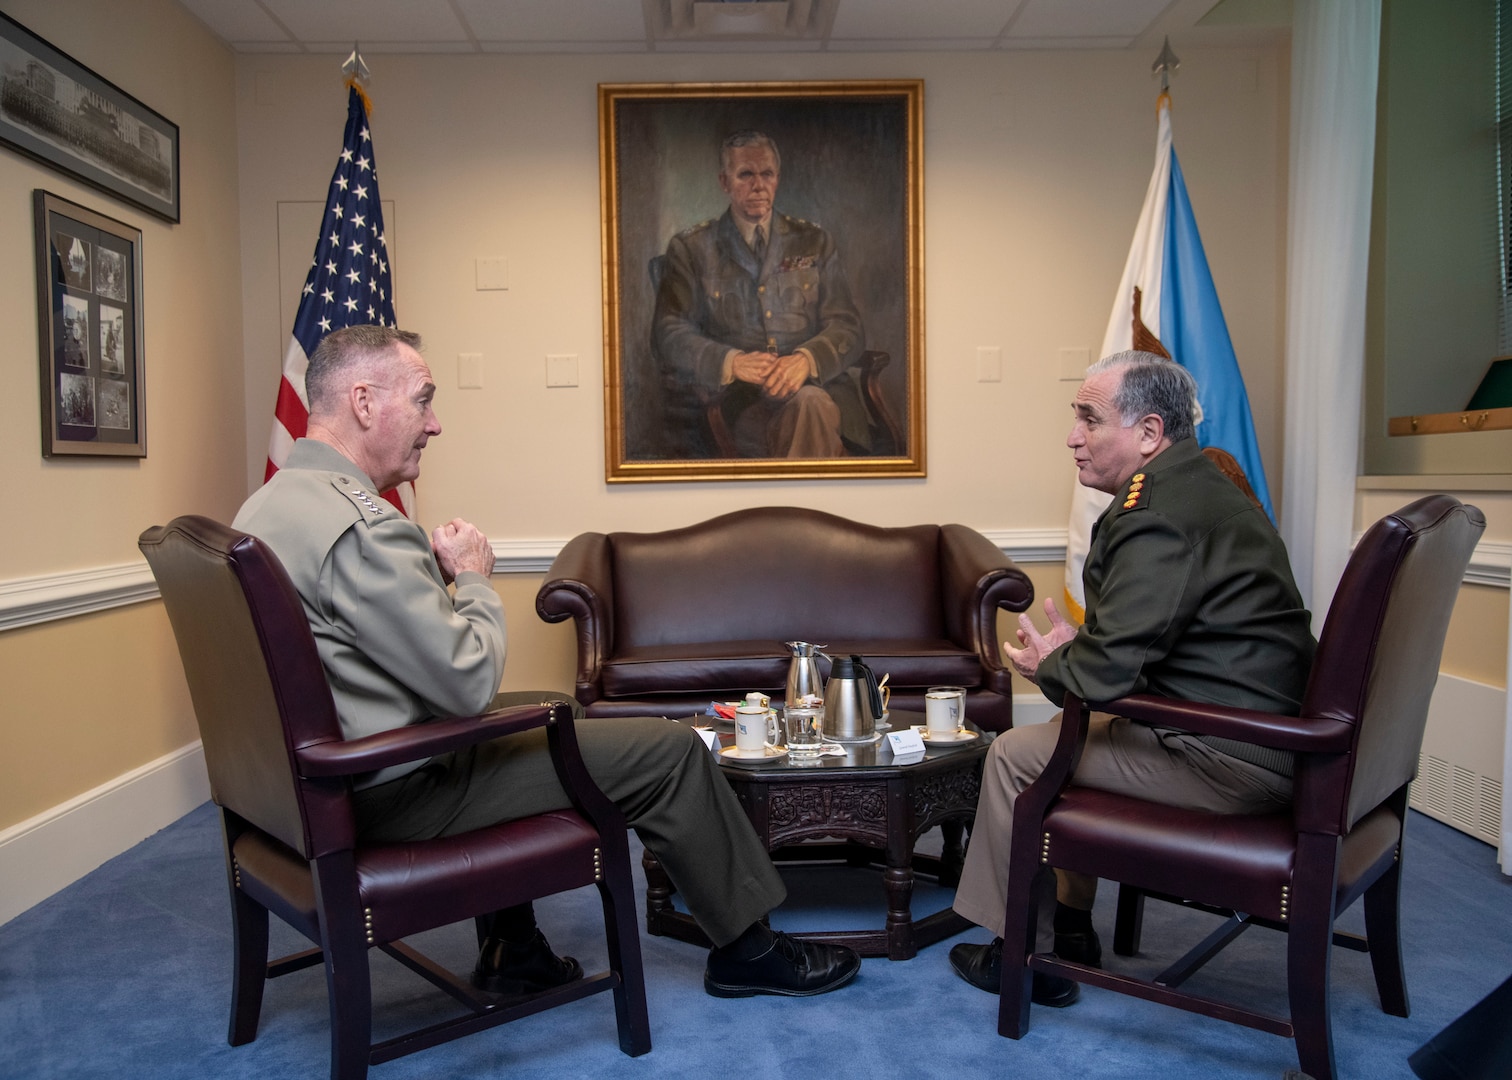 Chairman of the Joint Chiefs of Staff Gen. Joe Dunford met with Argentine Chief of Defense Gen. Bari del Valle Sosa in the Pentagon, Washington, D.C., April 5, 2019.